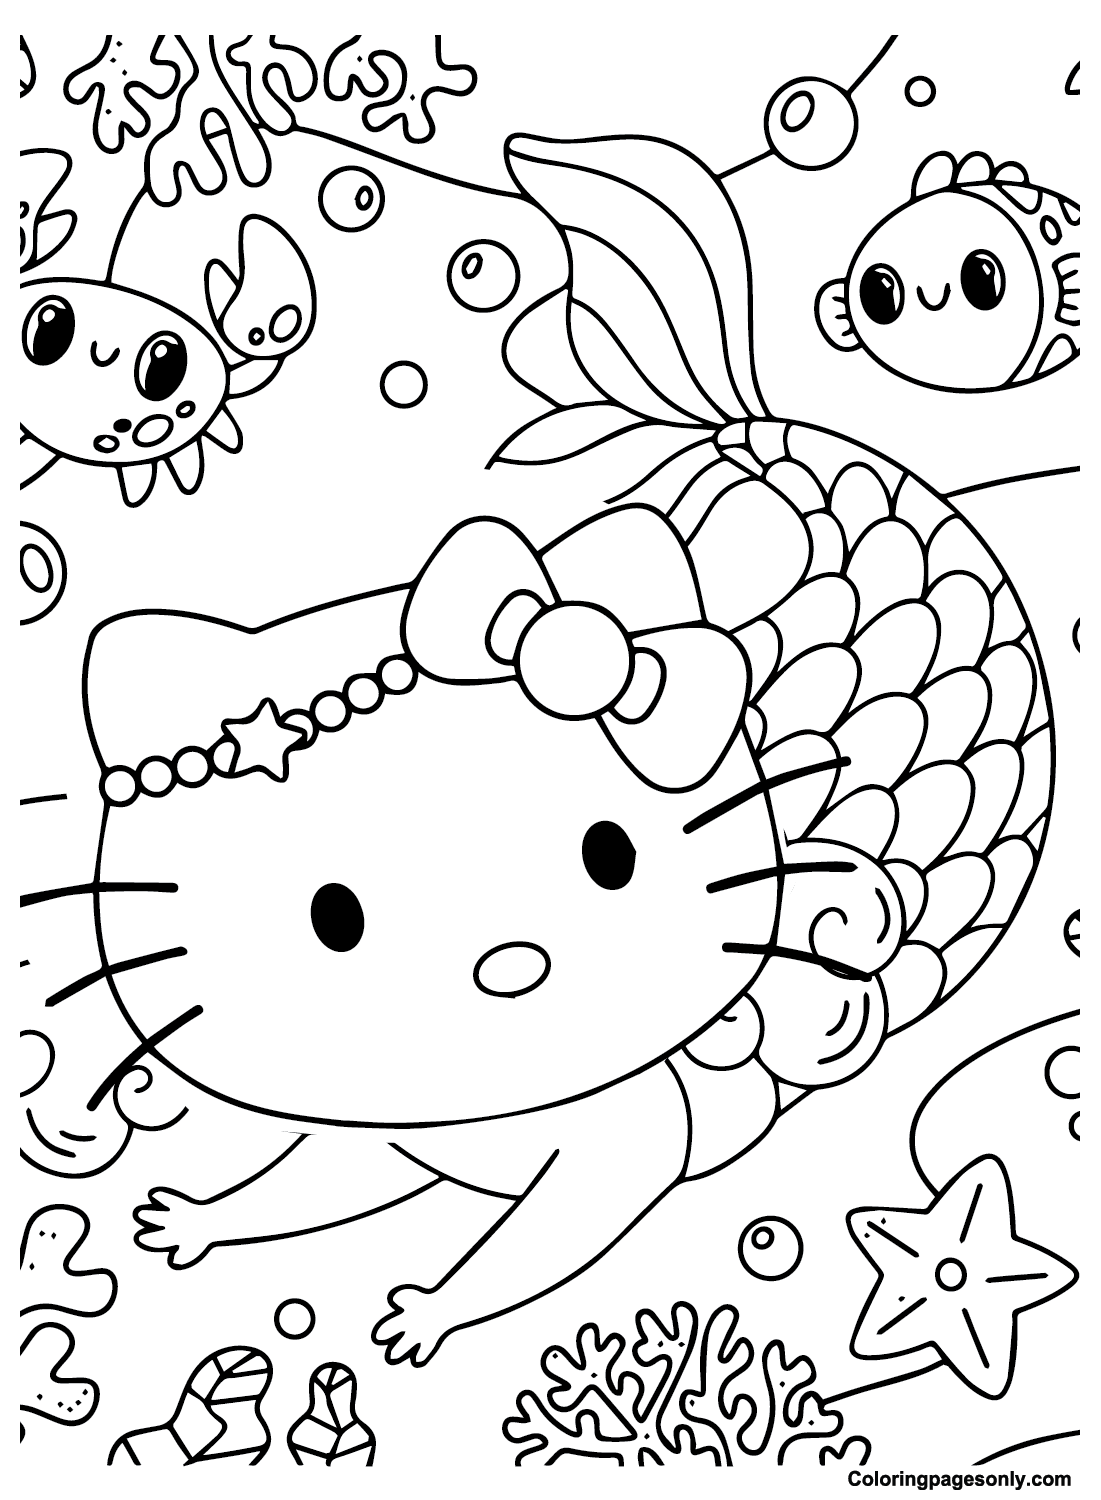 Adorable Hello Kitty Mermaid Coloring Page